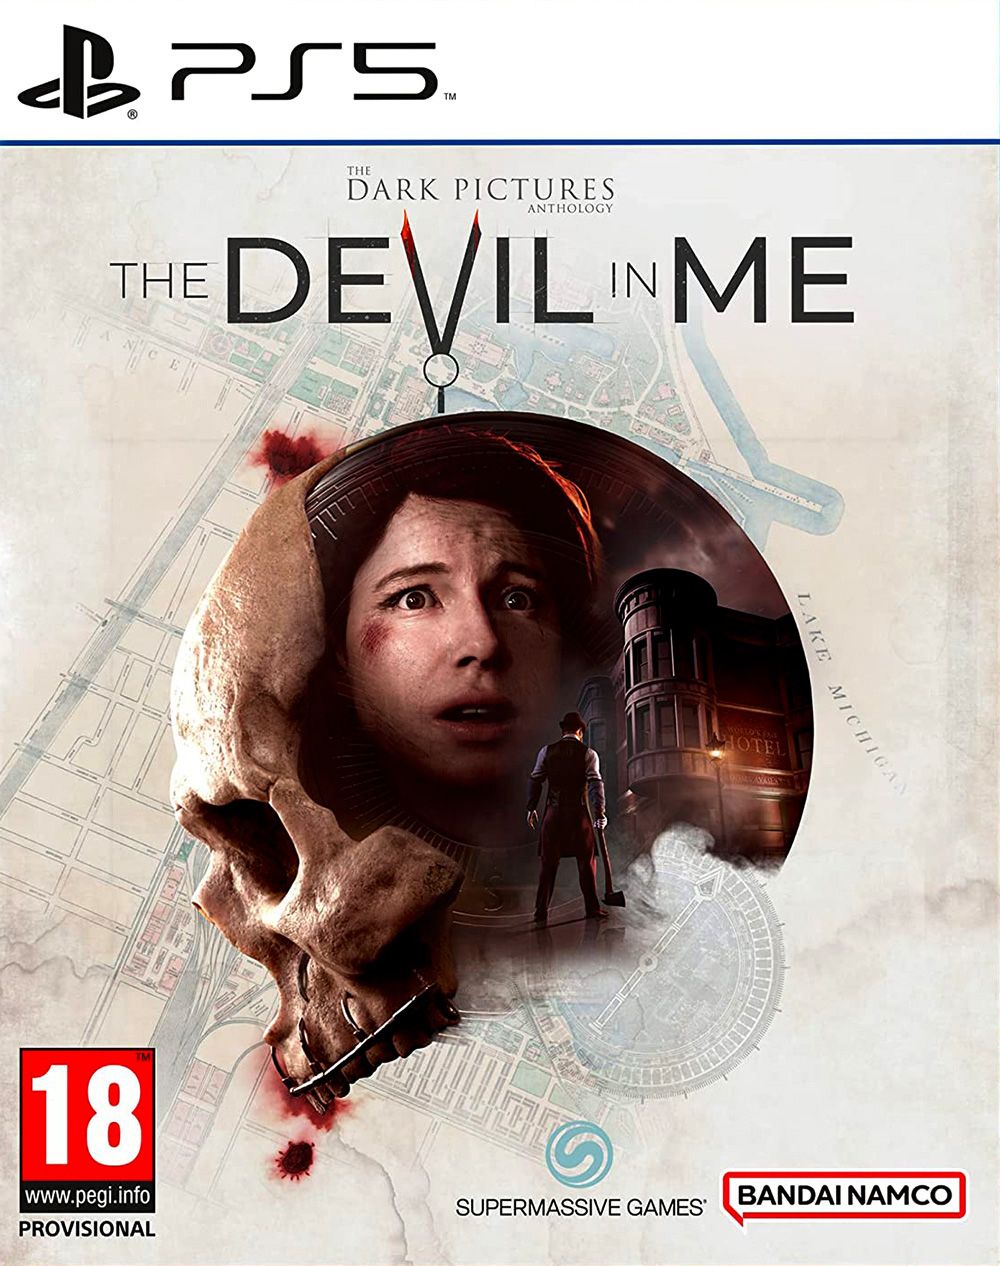 Dark Pictures Anthology, The: The Devil in Me (PS5) | PlayStation 5